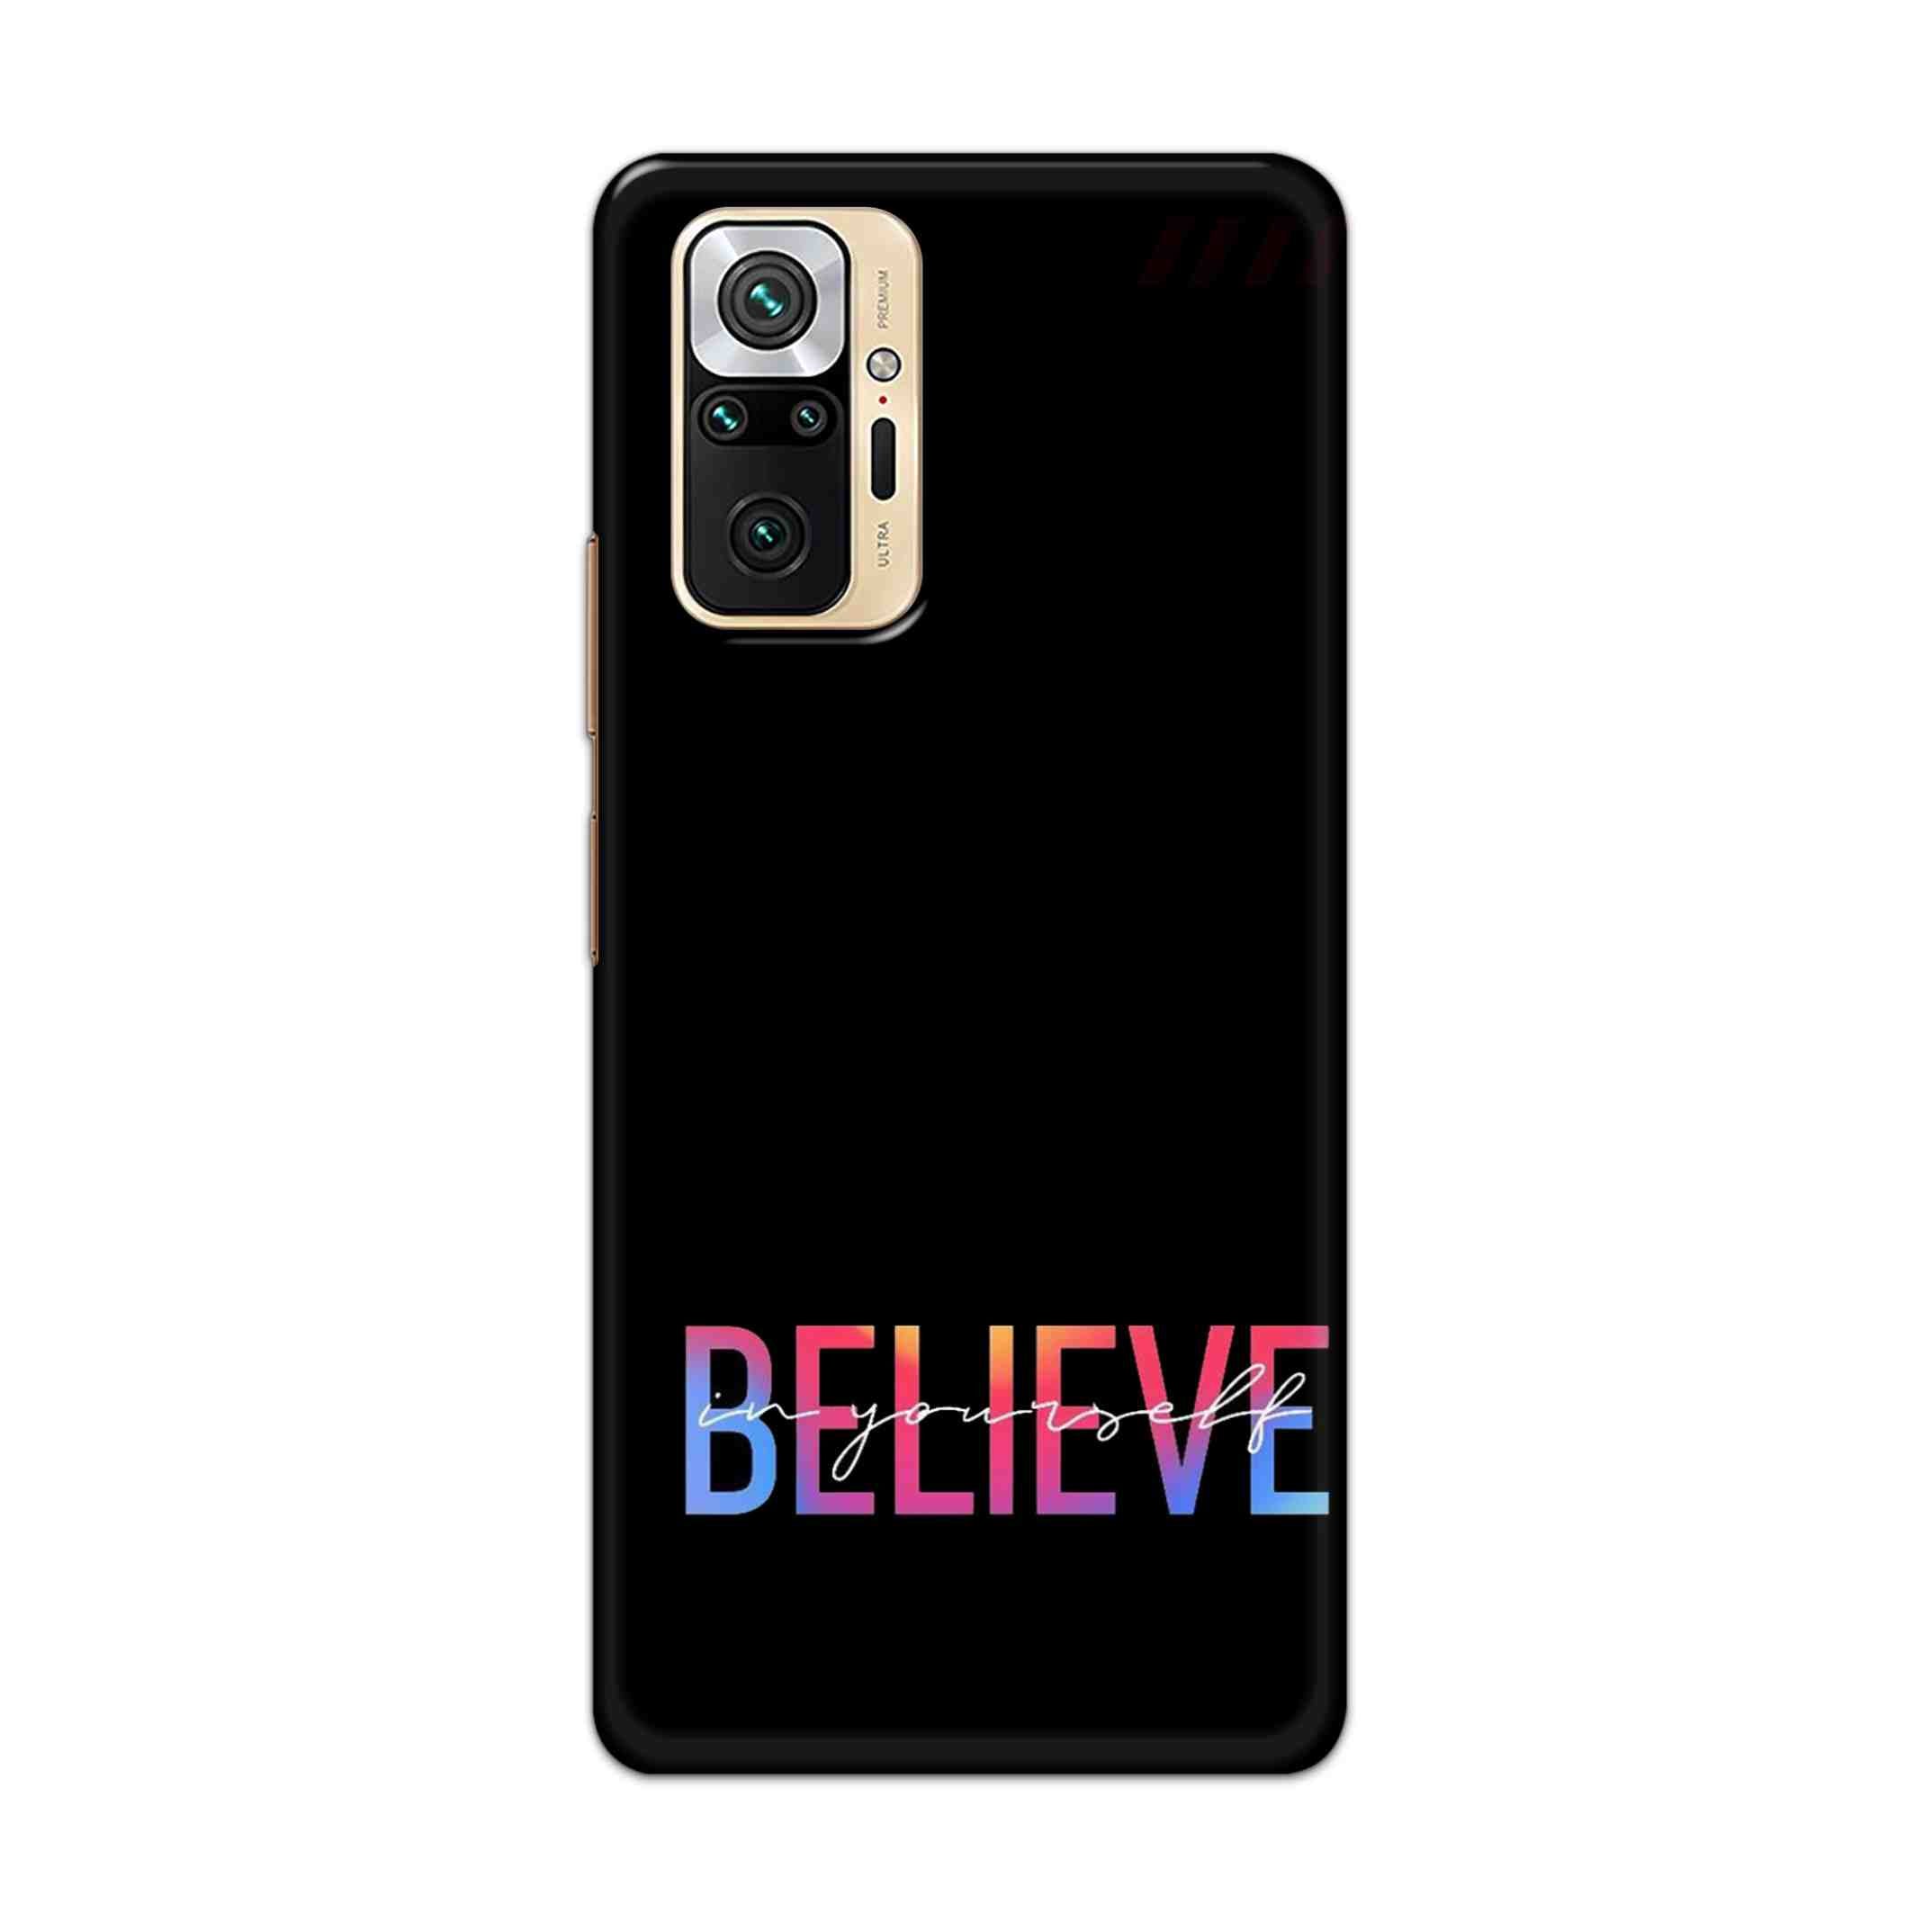 Buy Believe Hard Back Mobile Phone Case Cover For Redmi Note 10 Pro Max Online